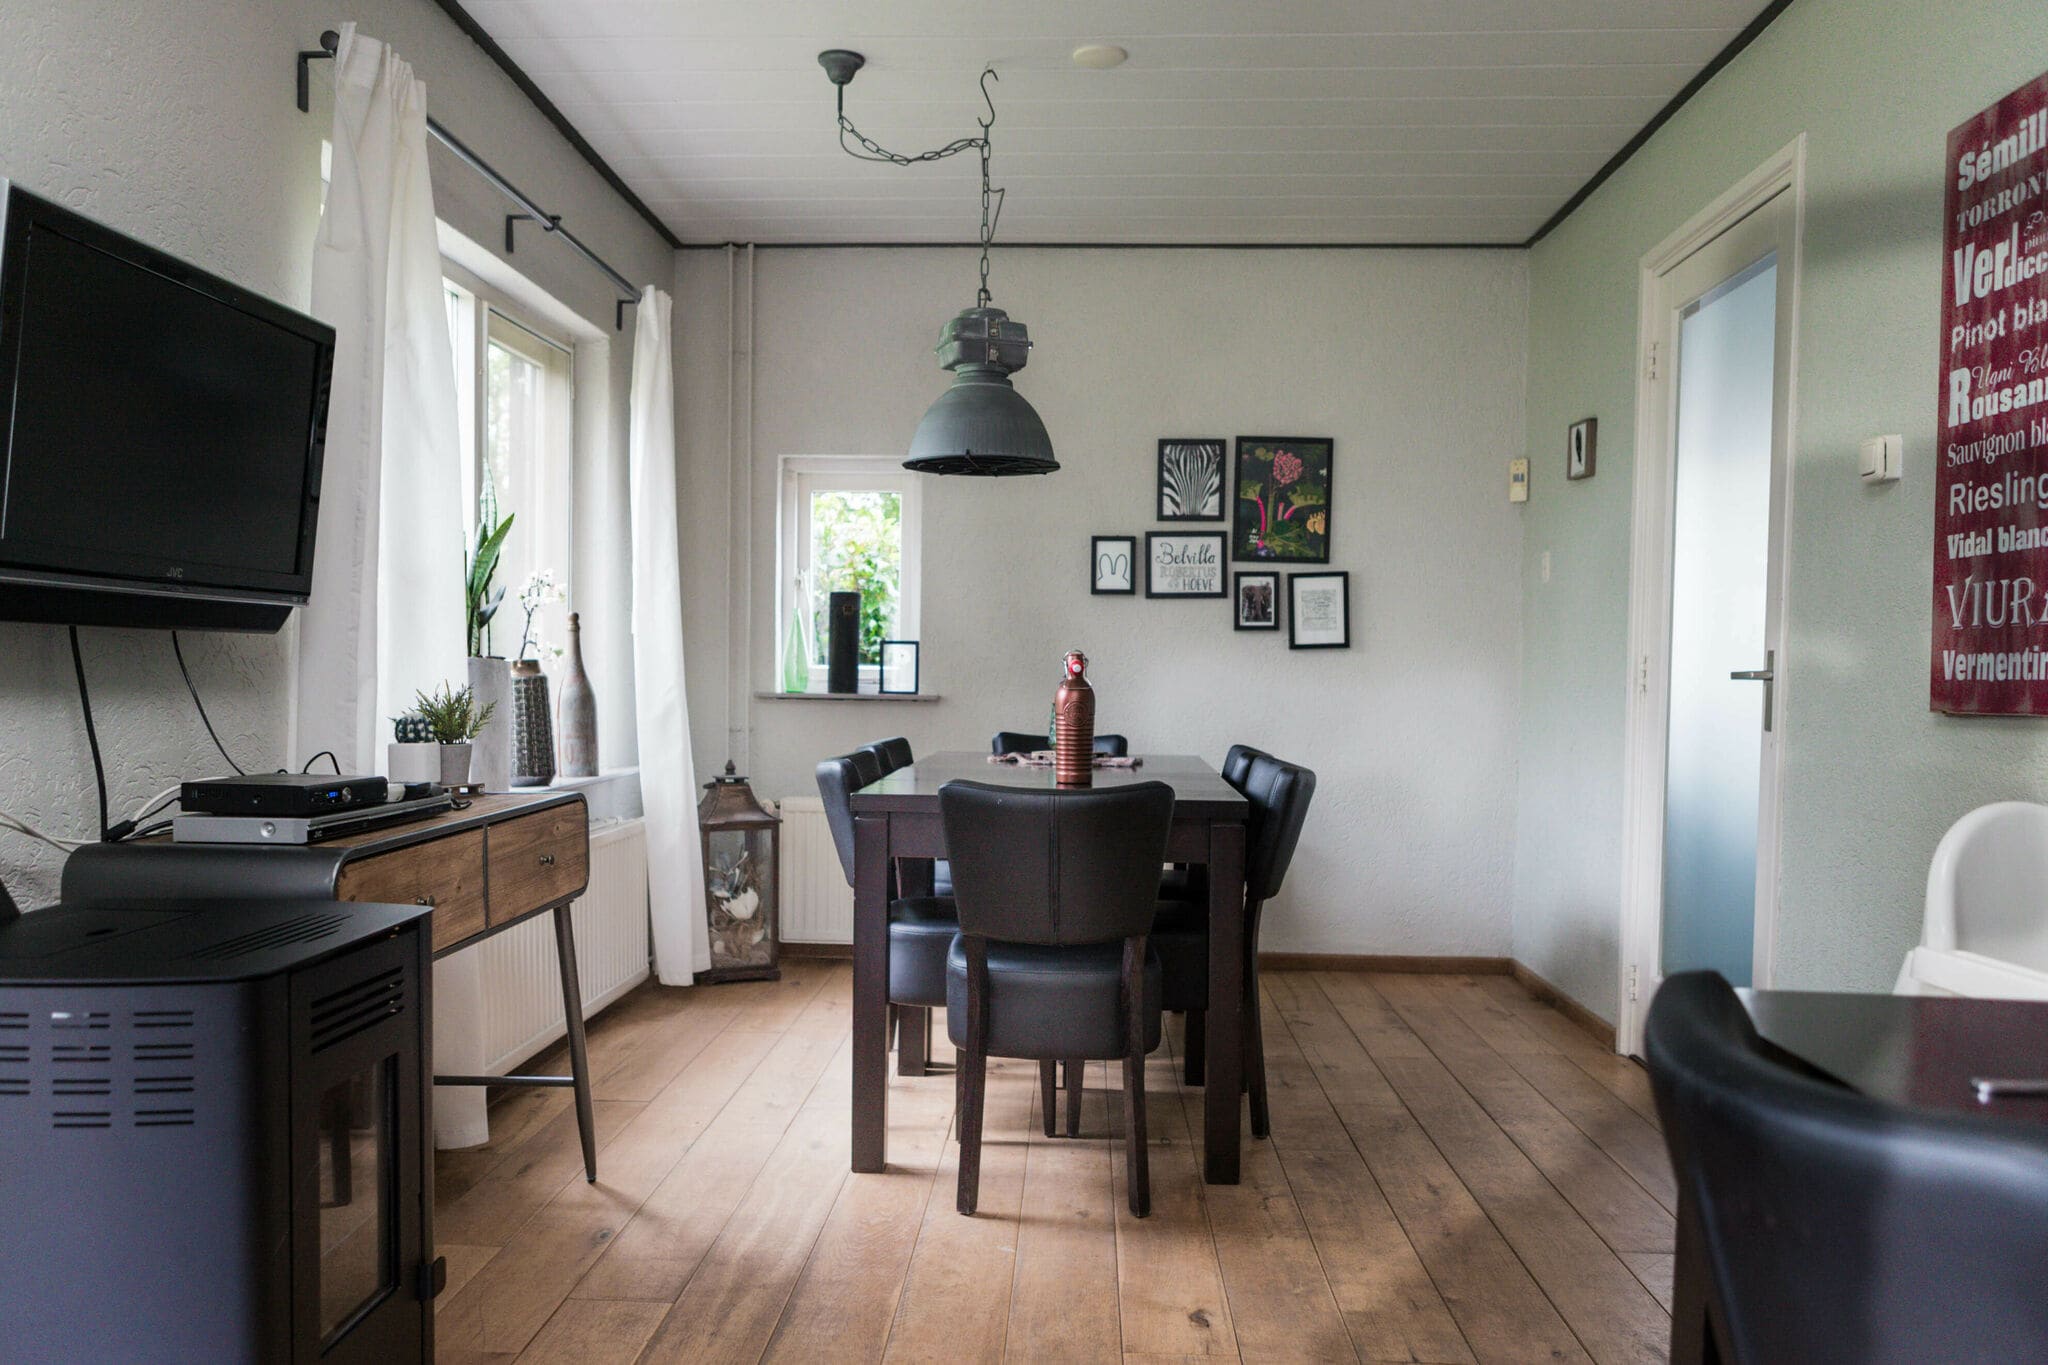 Detached atmospheric farmhouse with large garden and privacy near Dalfsen